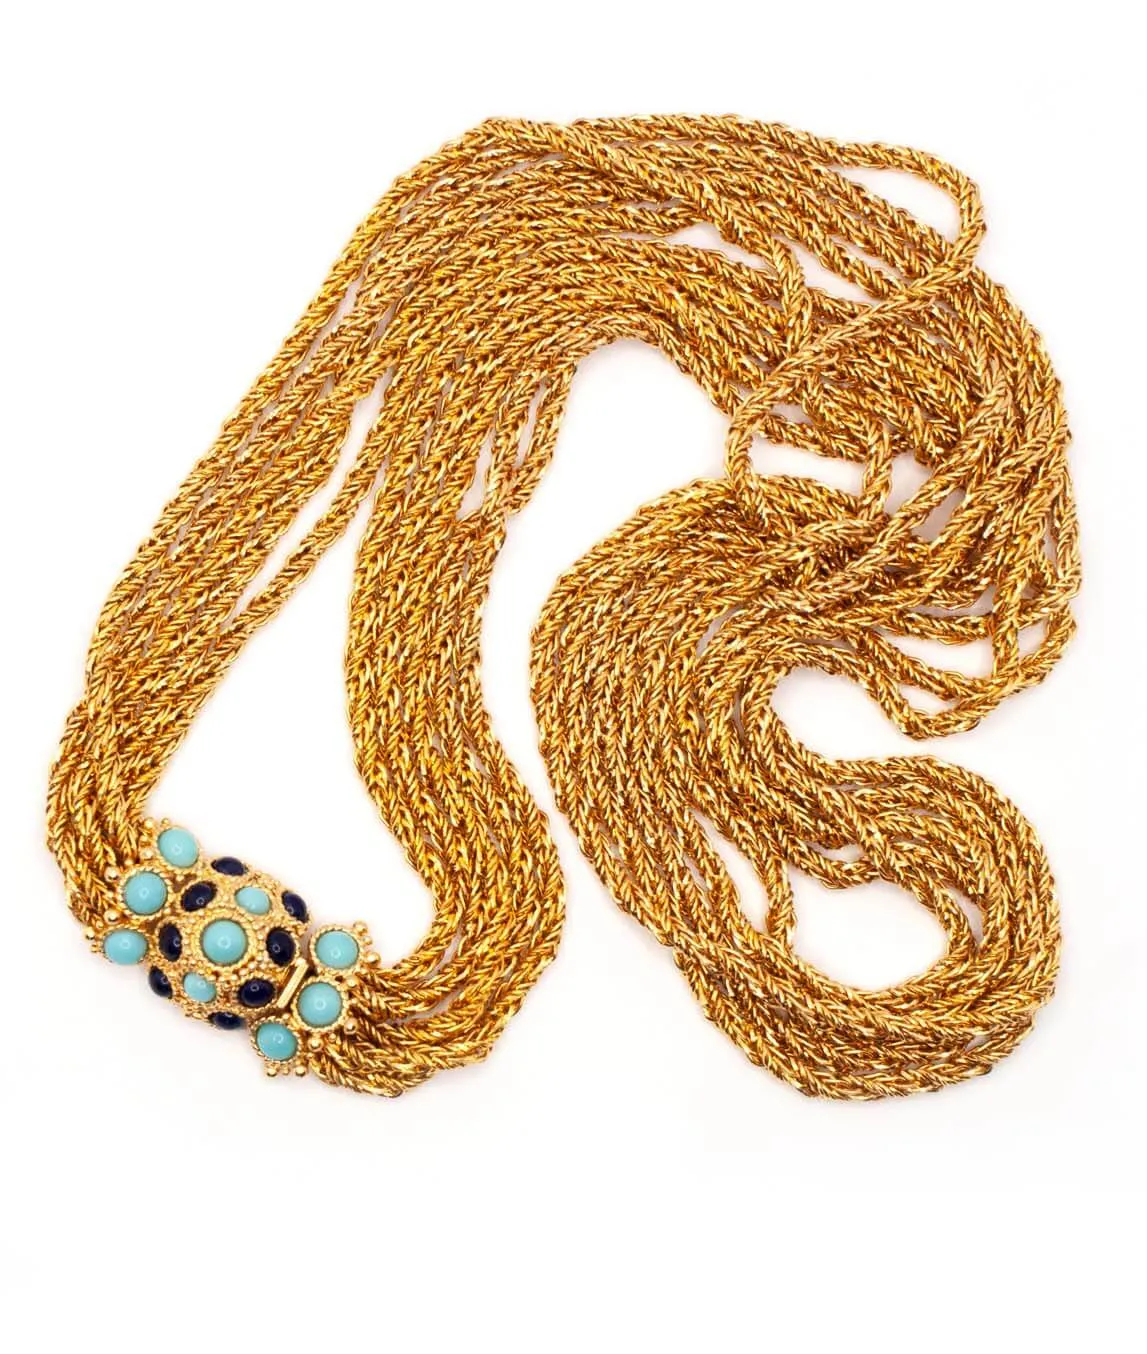 Christian Dior multi-chain necklace with turquoise and blue glass decorative clasp